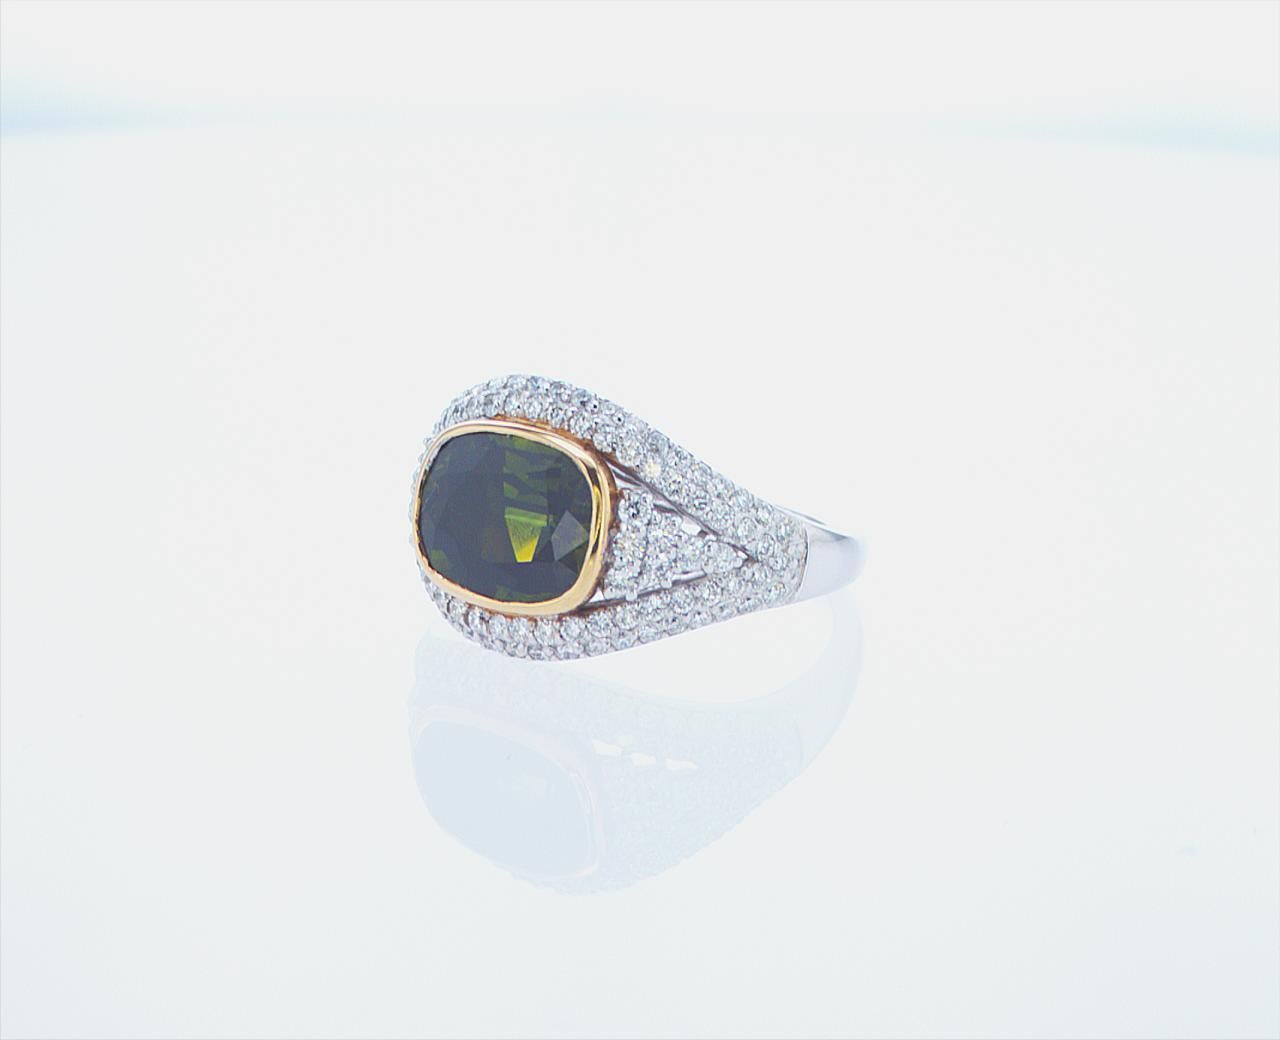 3.40ct Green Sapphire with 0.84ct Total Weight of G/H Color VS Clarity Diamonds.
